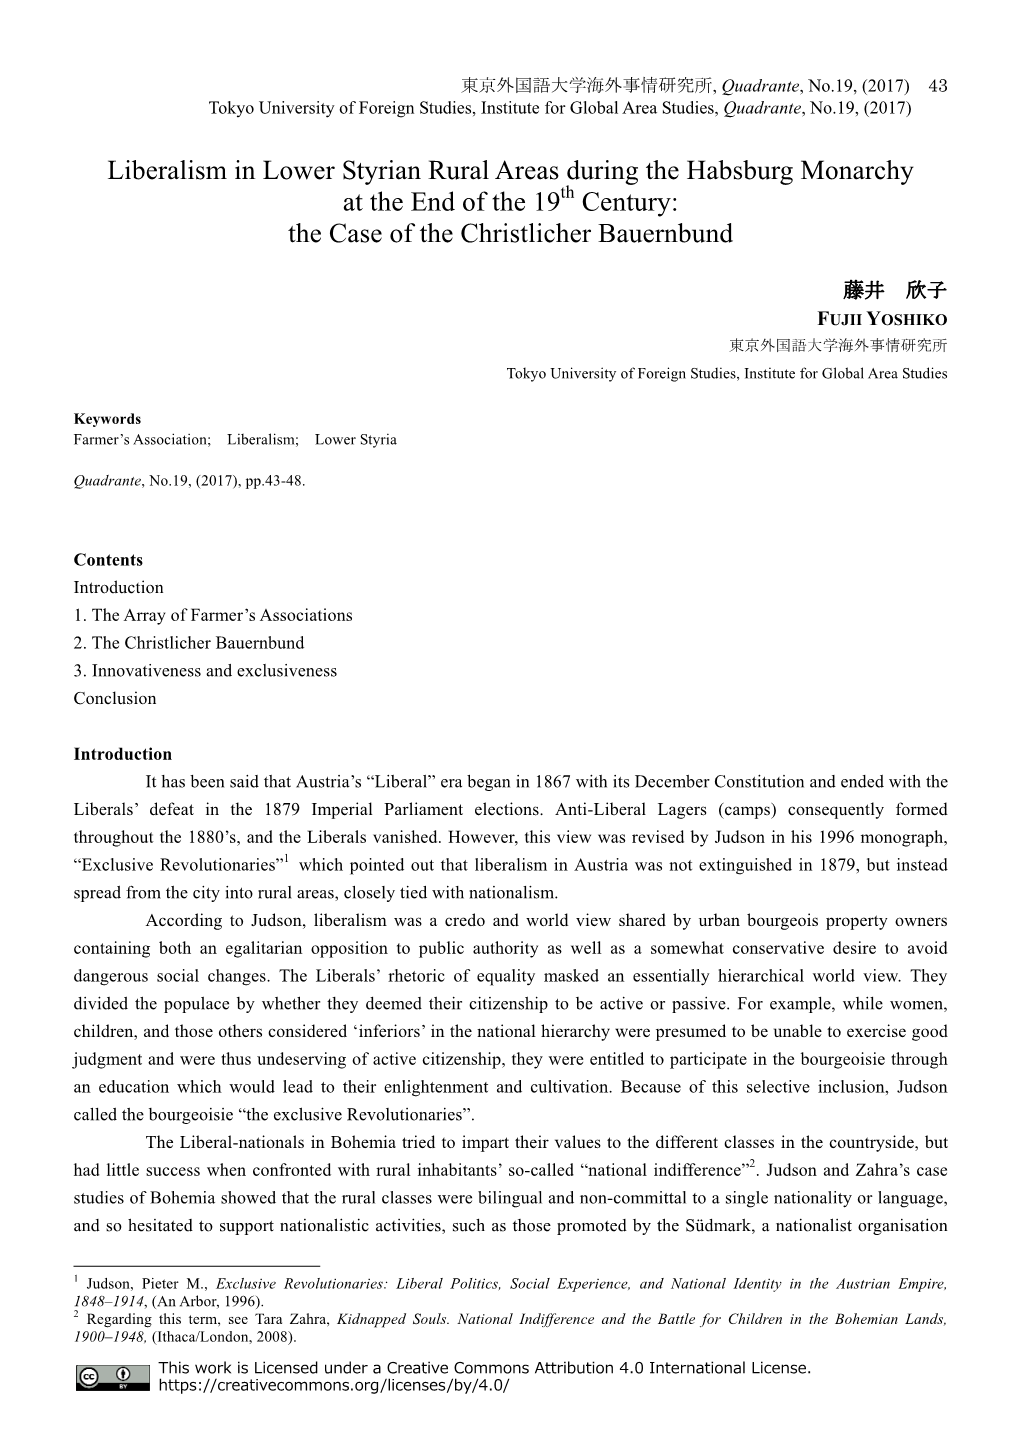 Liberalism in Lower Styrian Rural Areas During the Habsburg Monarchy at the End of the 19Th Century: the Case of the Christlicher Bauernbund